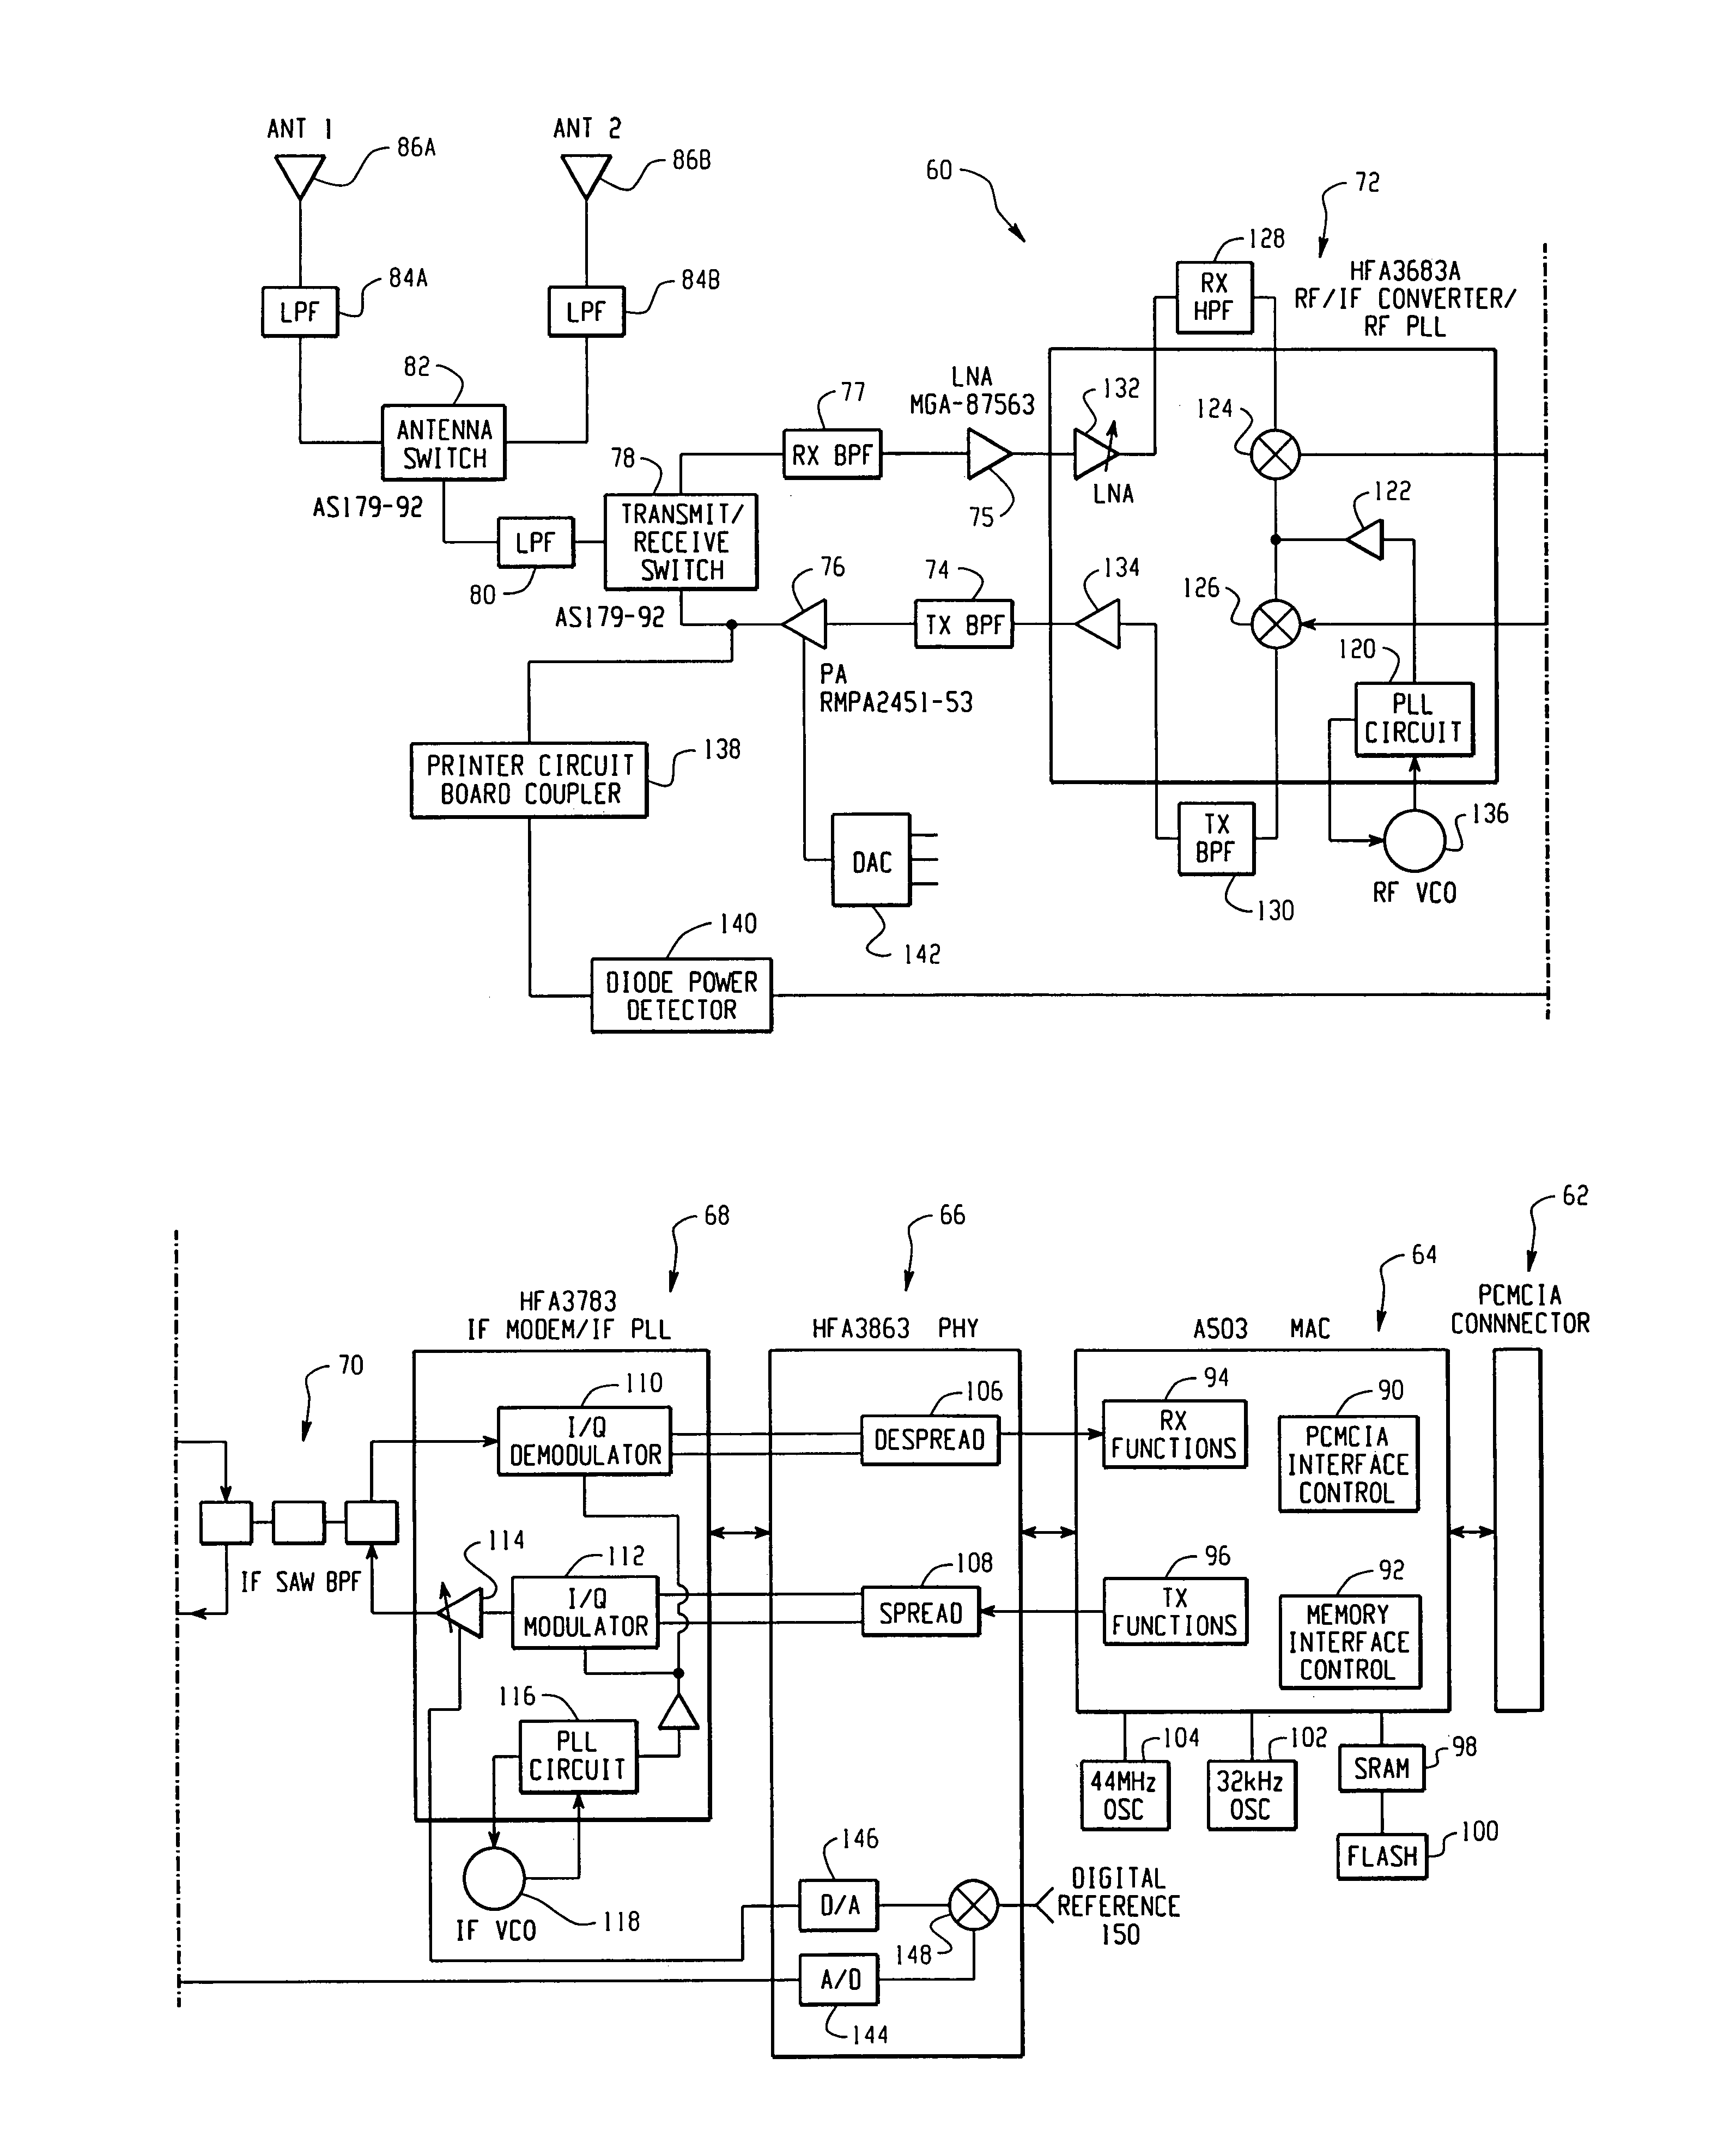 Maintaining constant power over a wide range of temperatures employing a power amplifier with adjustable current drain